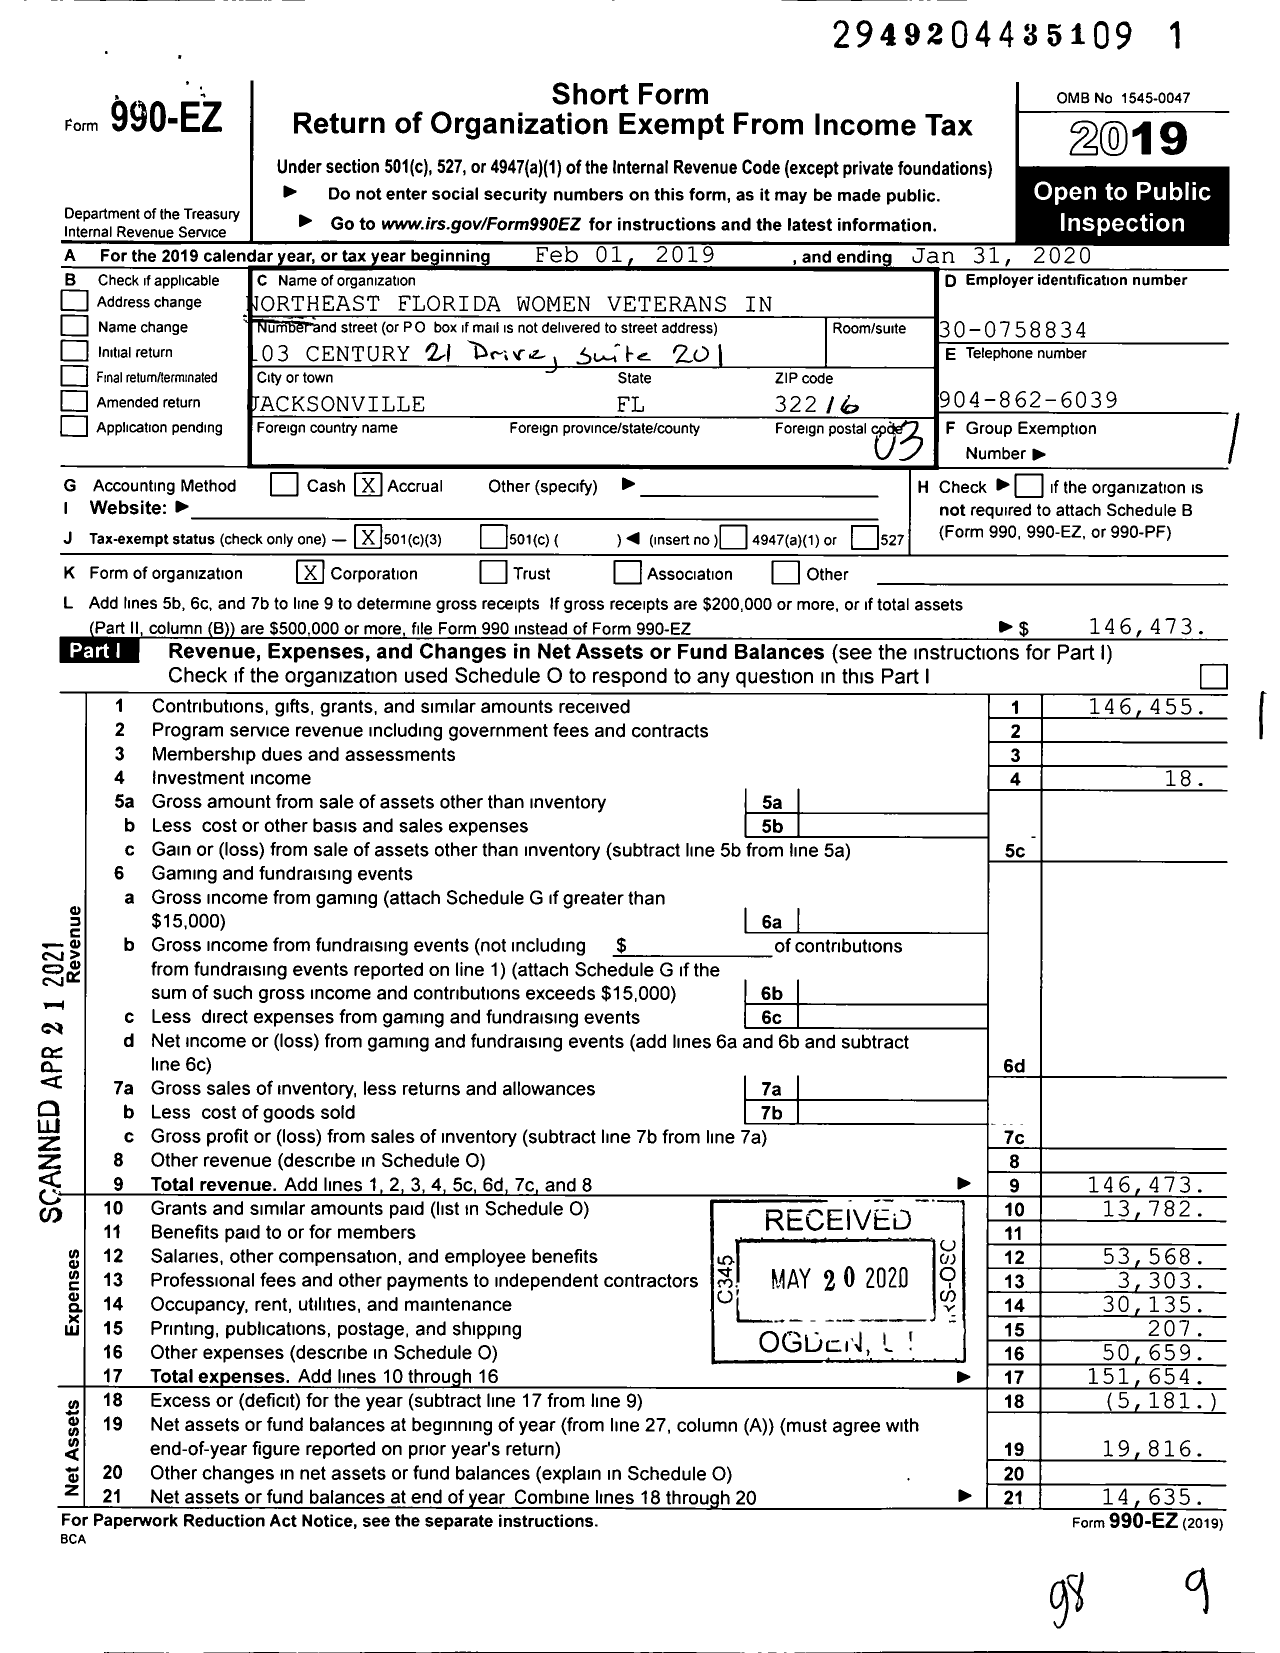 Image of first page of 2019 Form 990EZ for Northeast Florida Women Veterans